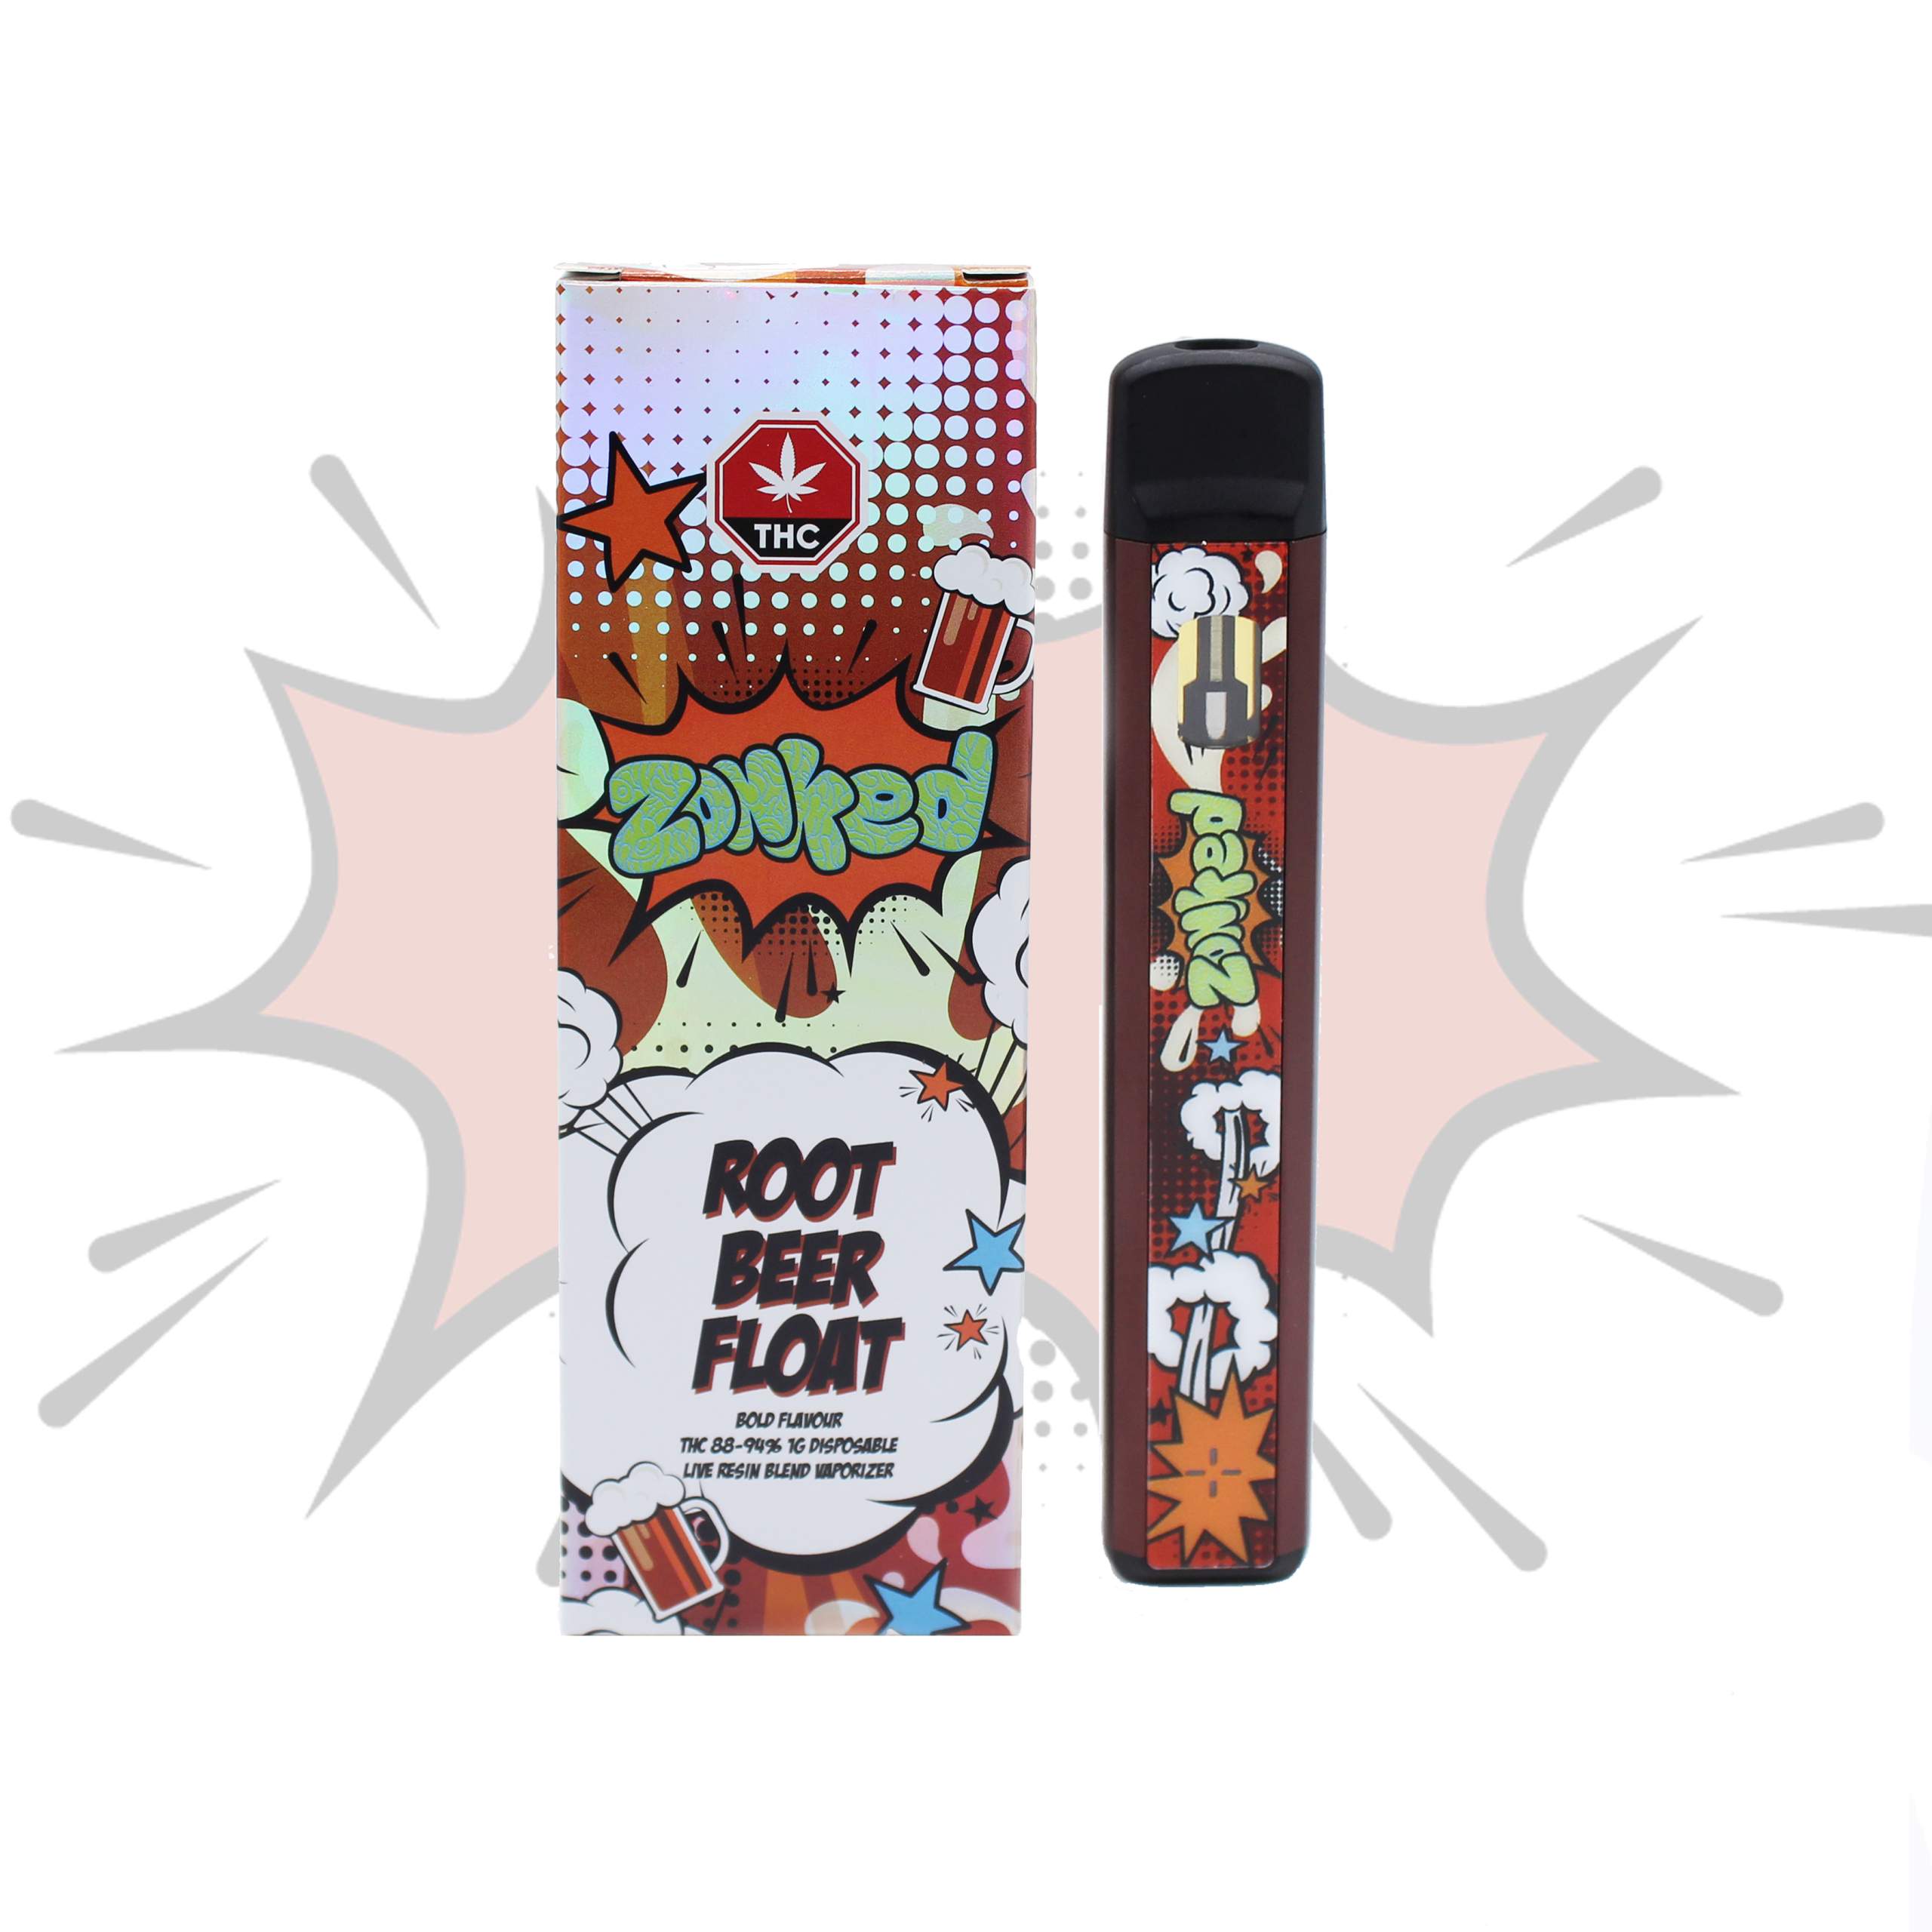 Zonked Live Resin Disposable Vape Pens (1g) - Root Beer